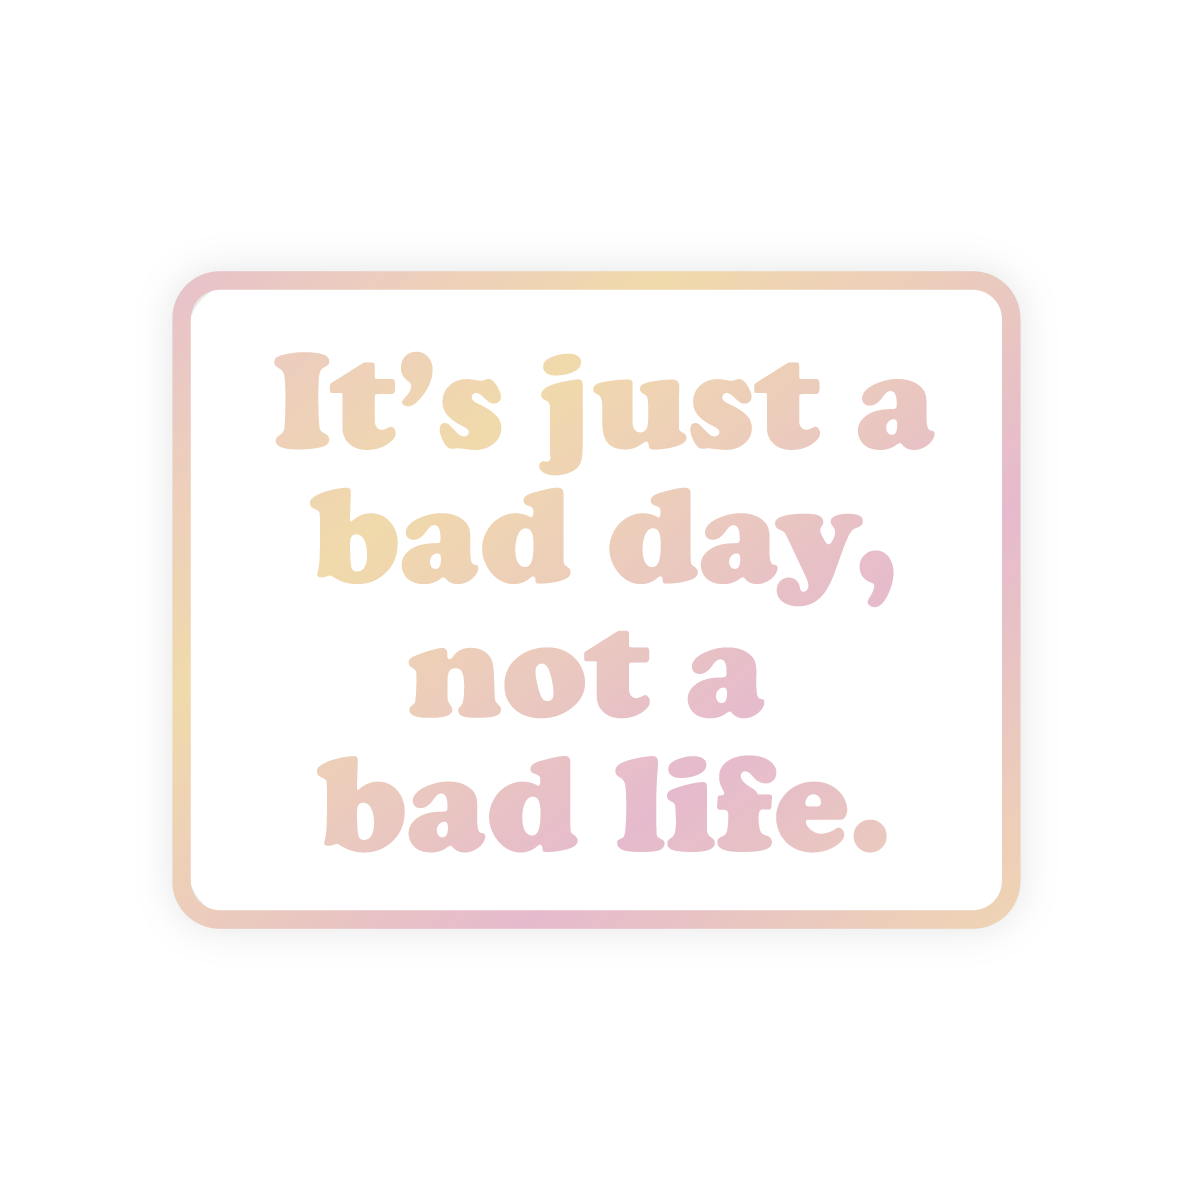 Inspirational Restickable Sticker - Bad Day Not Bad Life